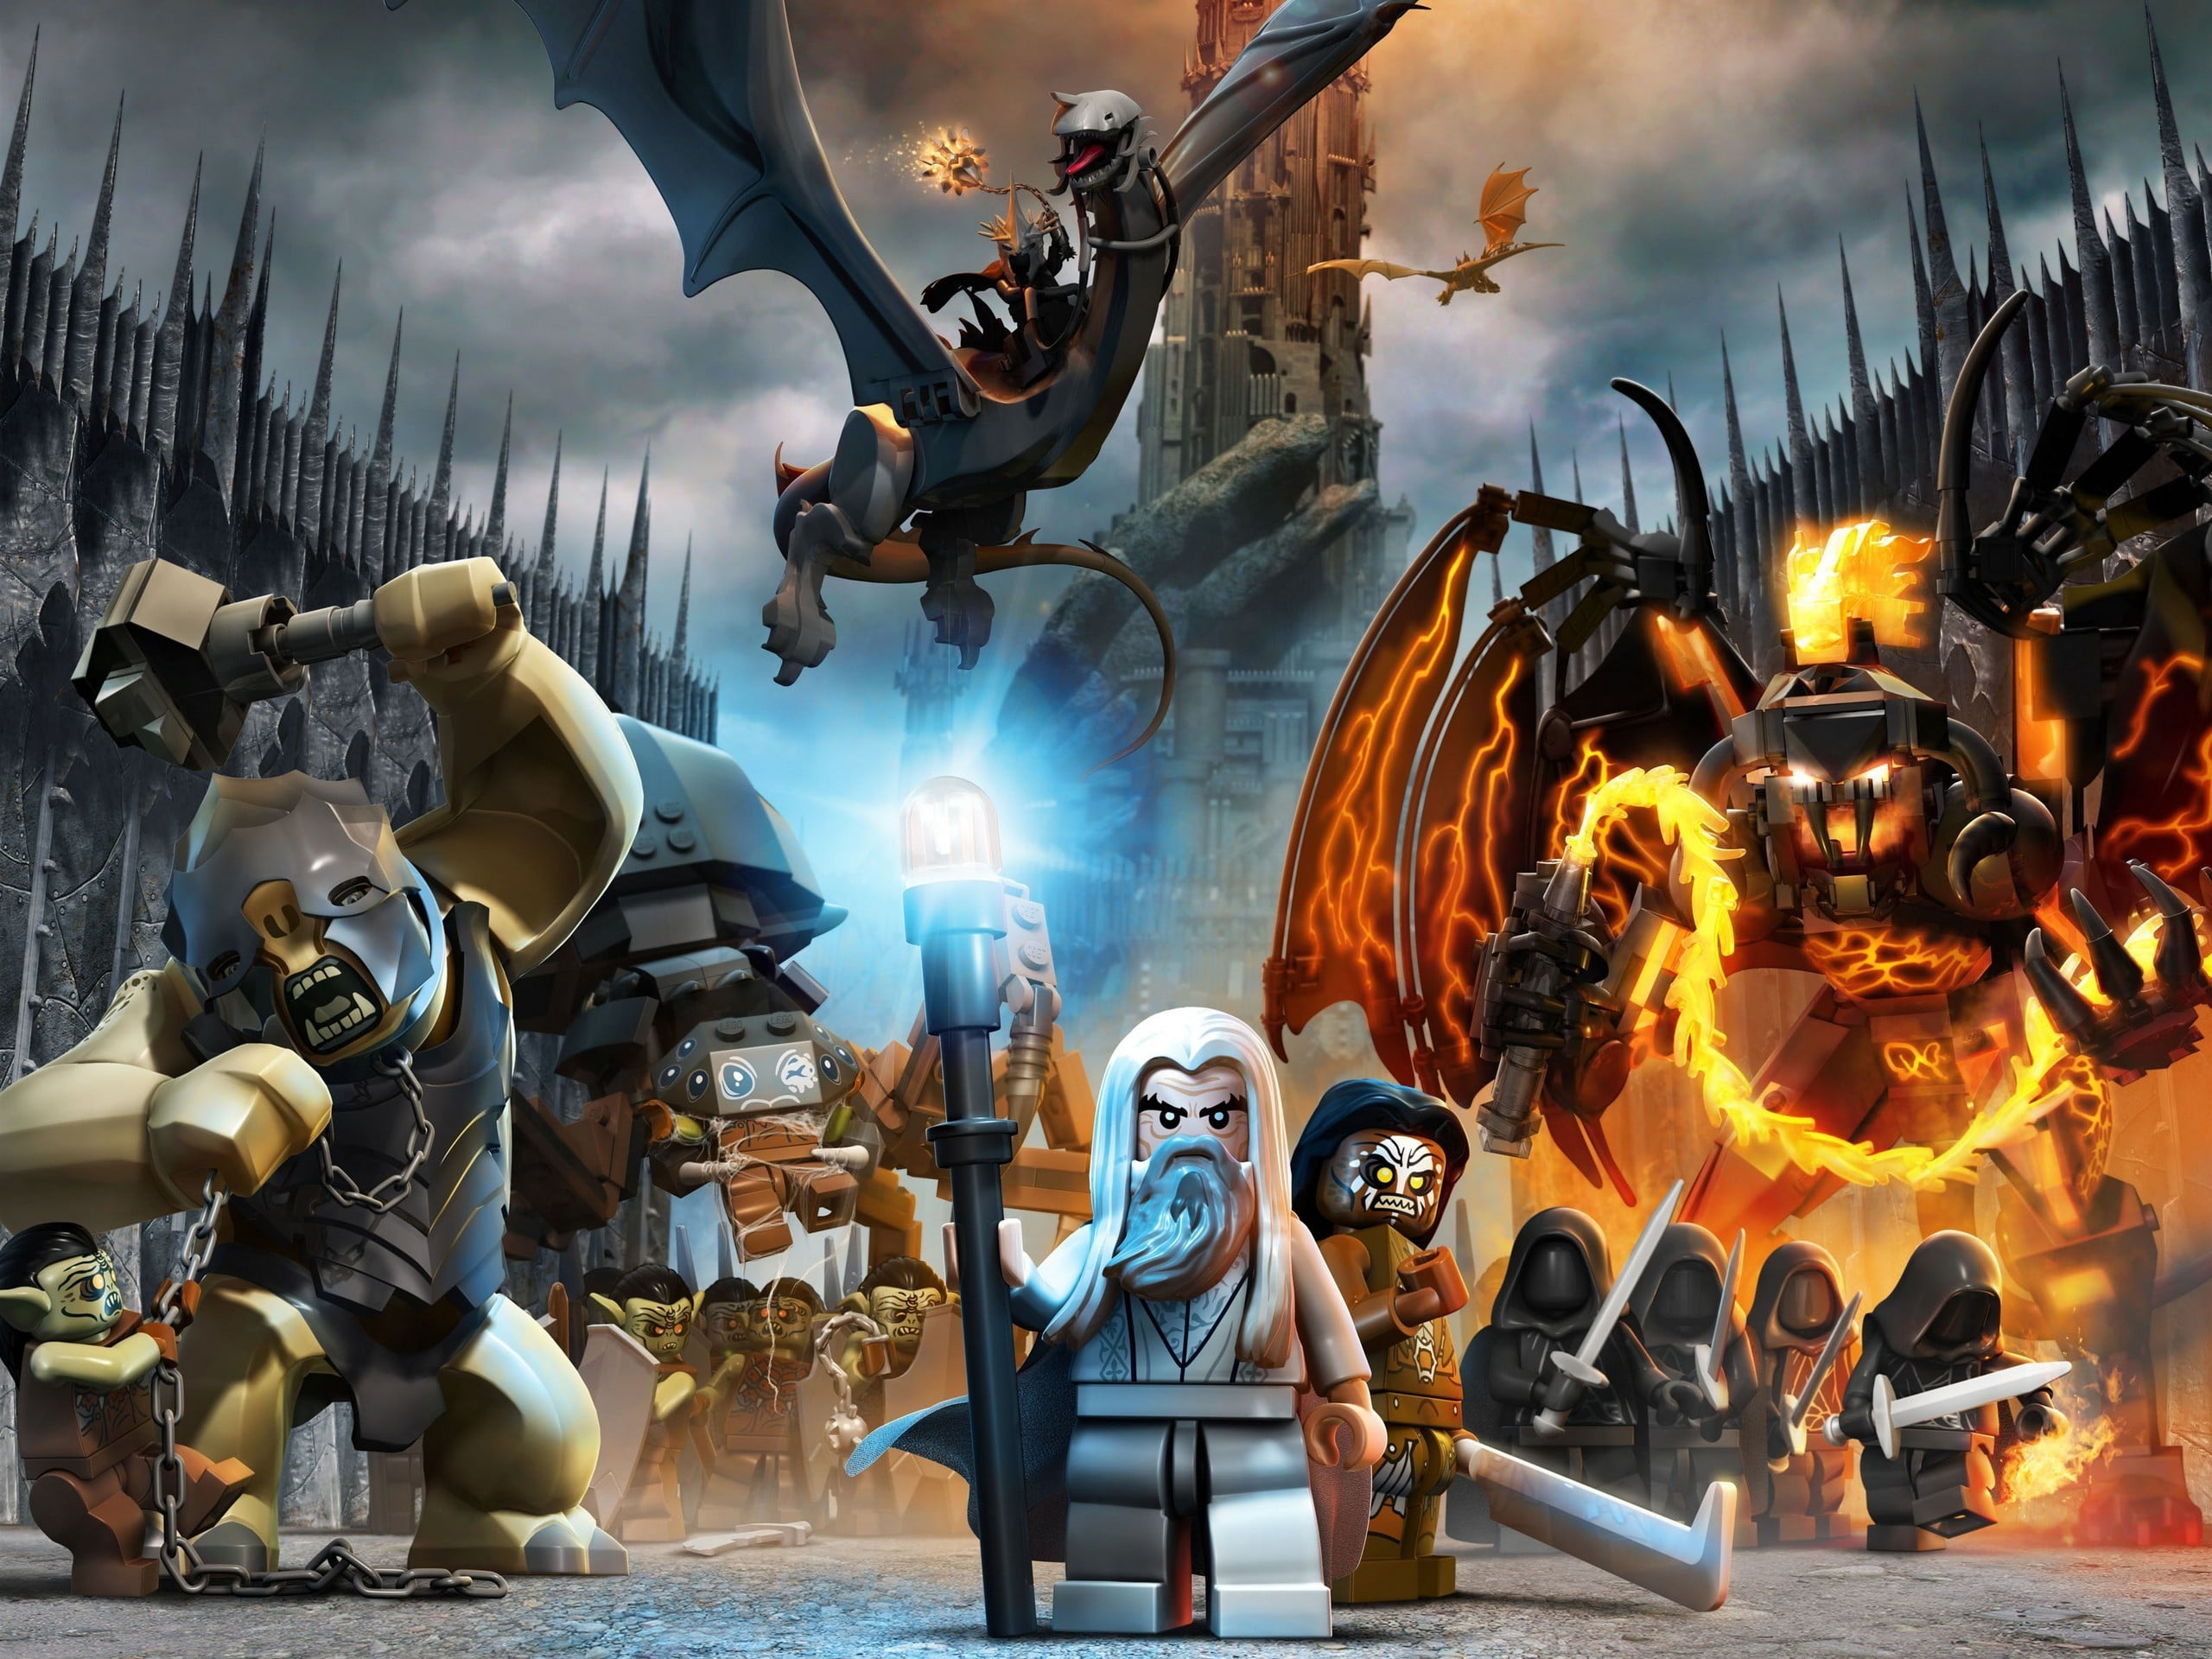 Lego game application, The Lord of the Rings, video games, representation